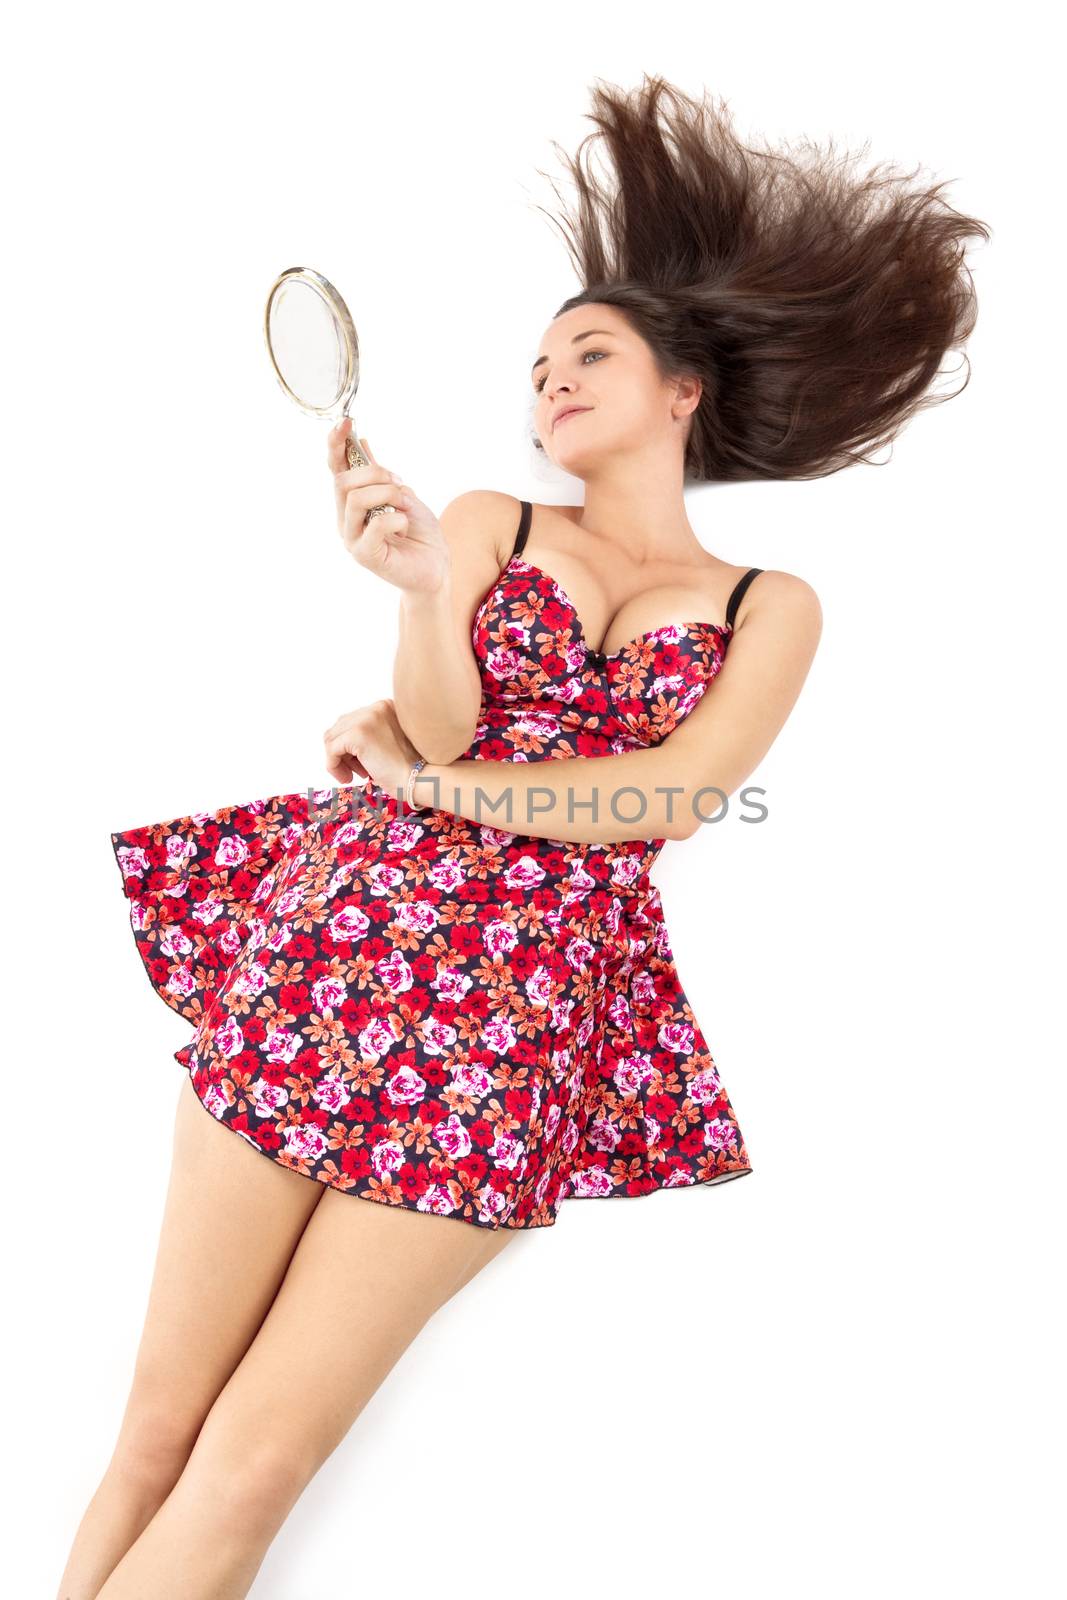 woman with hand mirror by courtyardpix